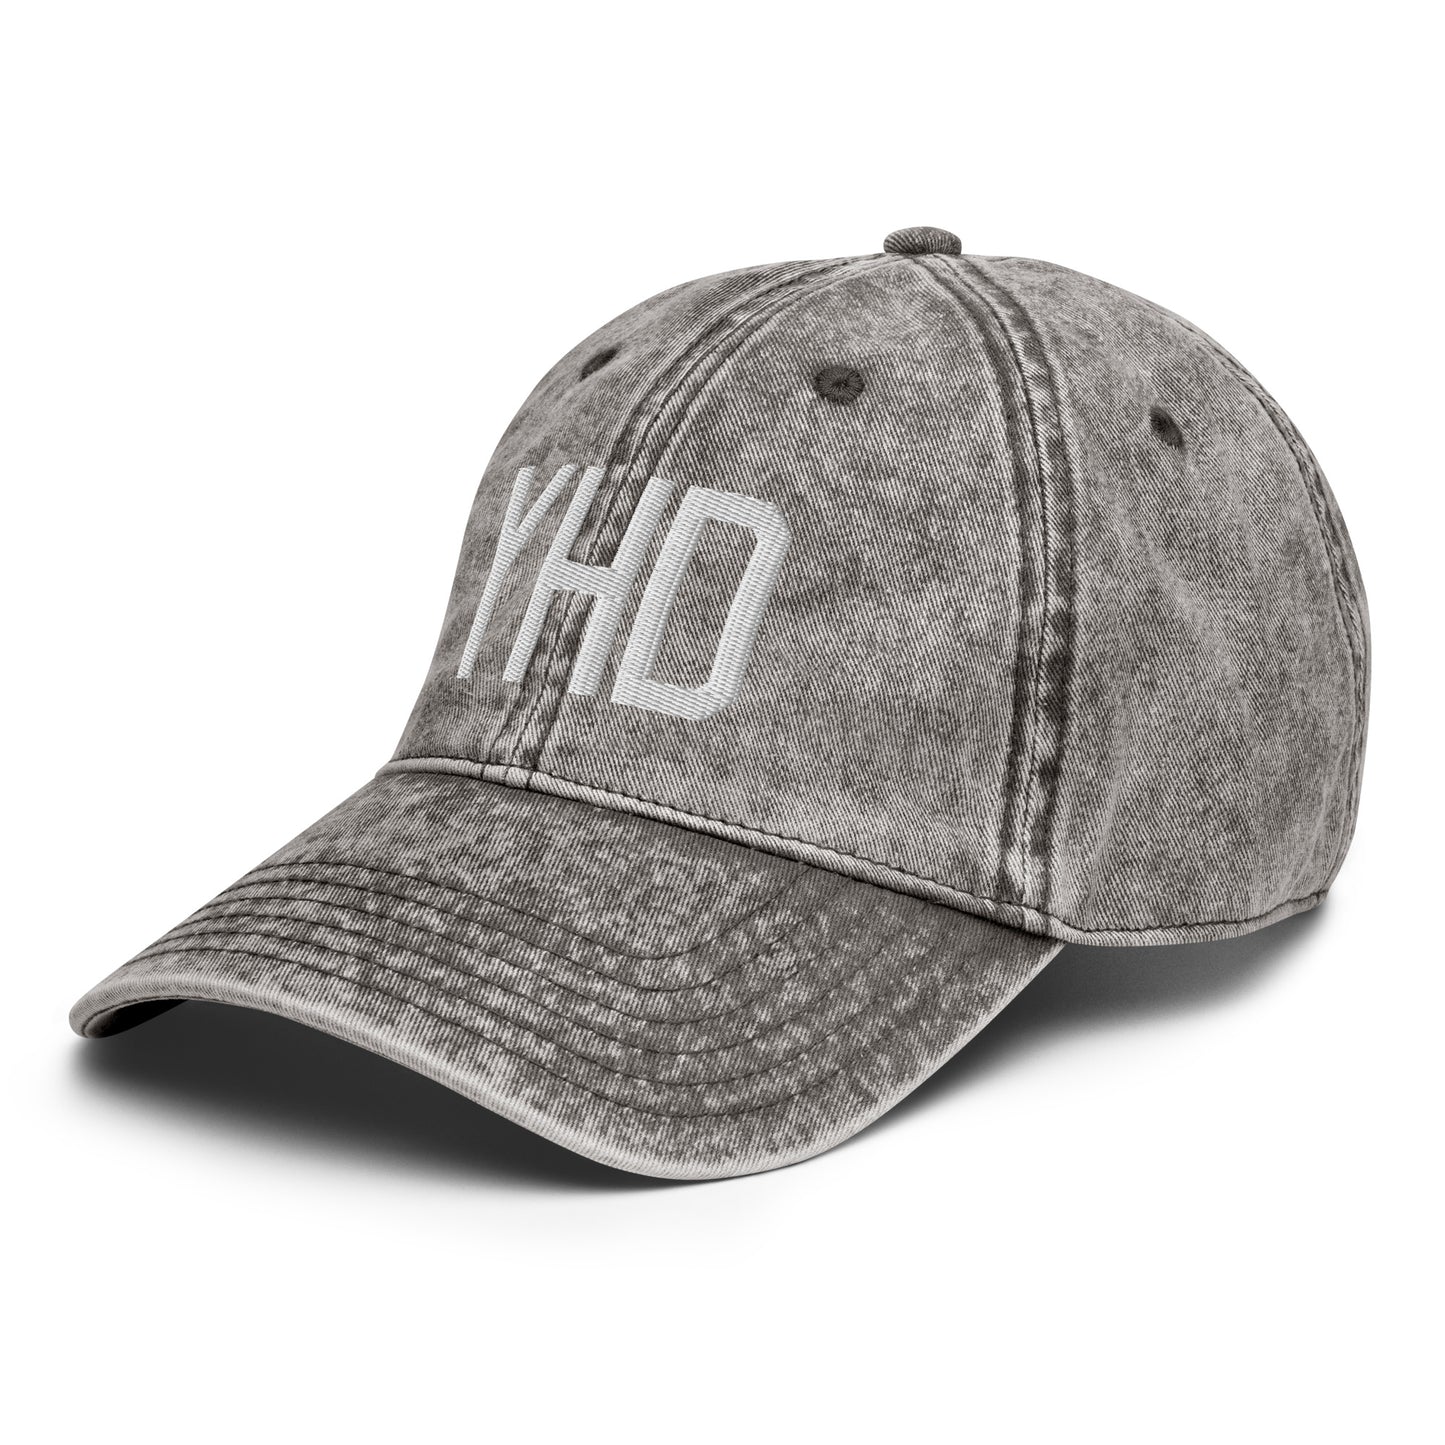 Airport Code Twill Cap - White • YHD Dryden • YHM Designs - Image 29